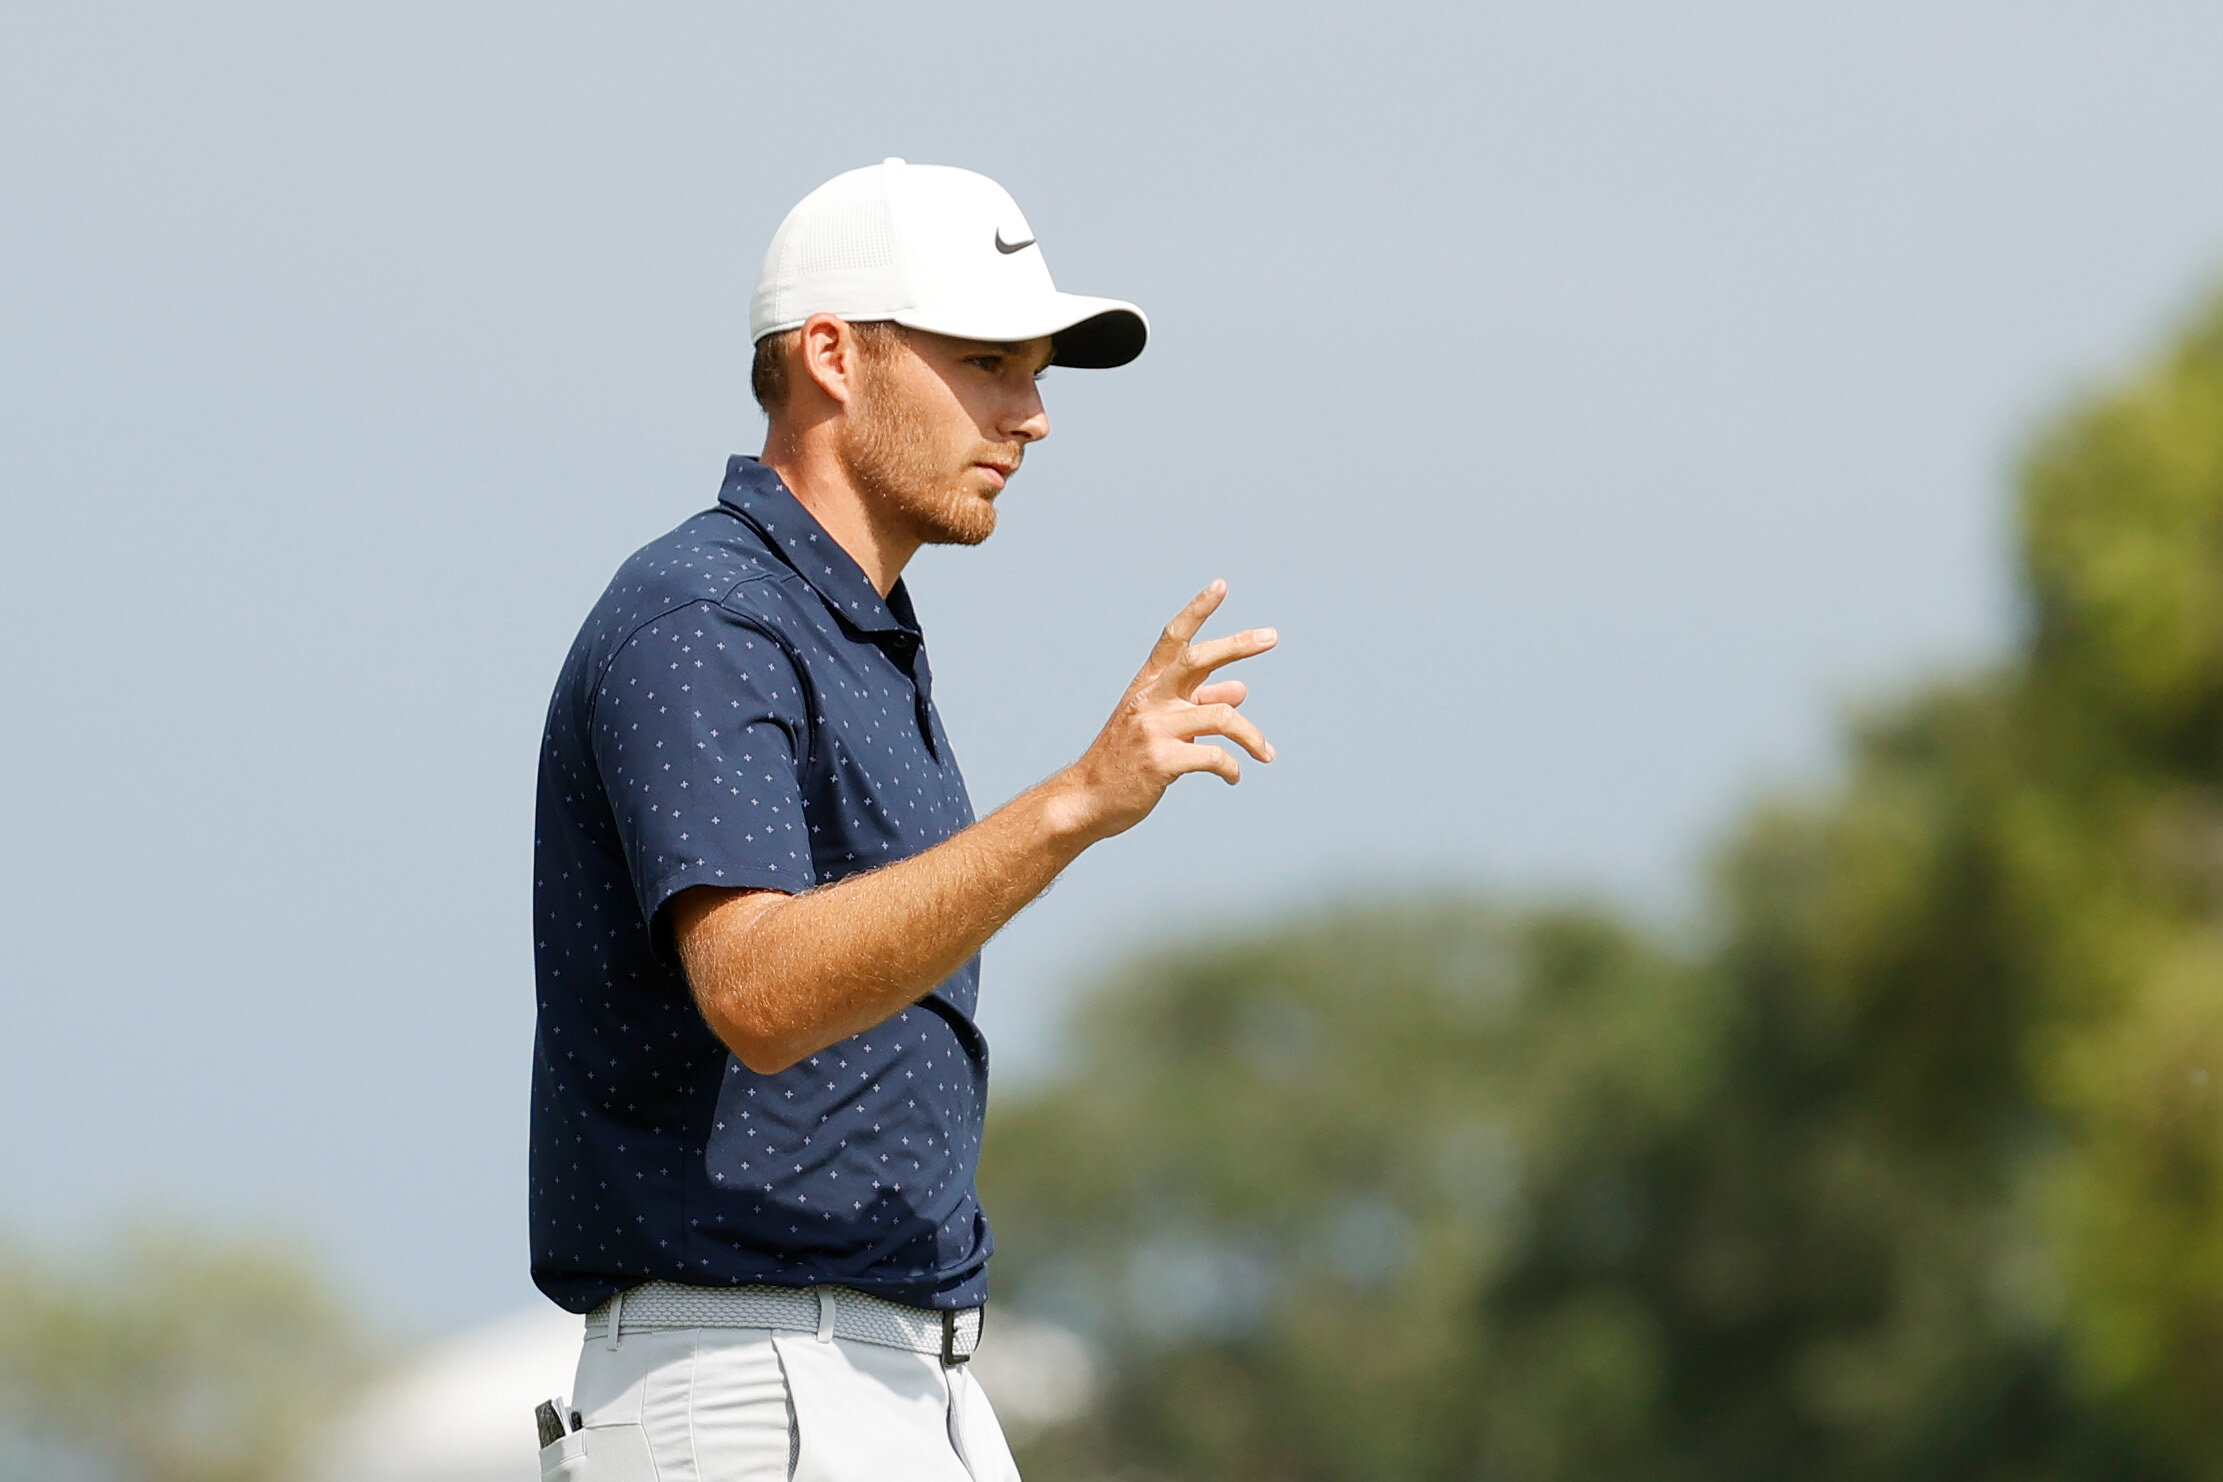  PALM BEACH GARDENS, FLORIDA - MARCH 19:  Aaron Wise of the United States reacts to his eagle on the third green during the second round of The Honda Classic at PGA National Champion course on March 19, 2021 in Palm Beach Gardens, Florida. (Photo by 